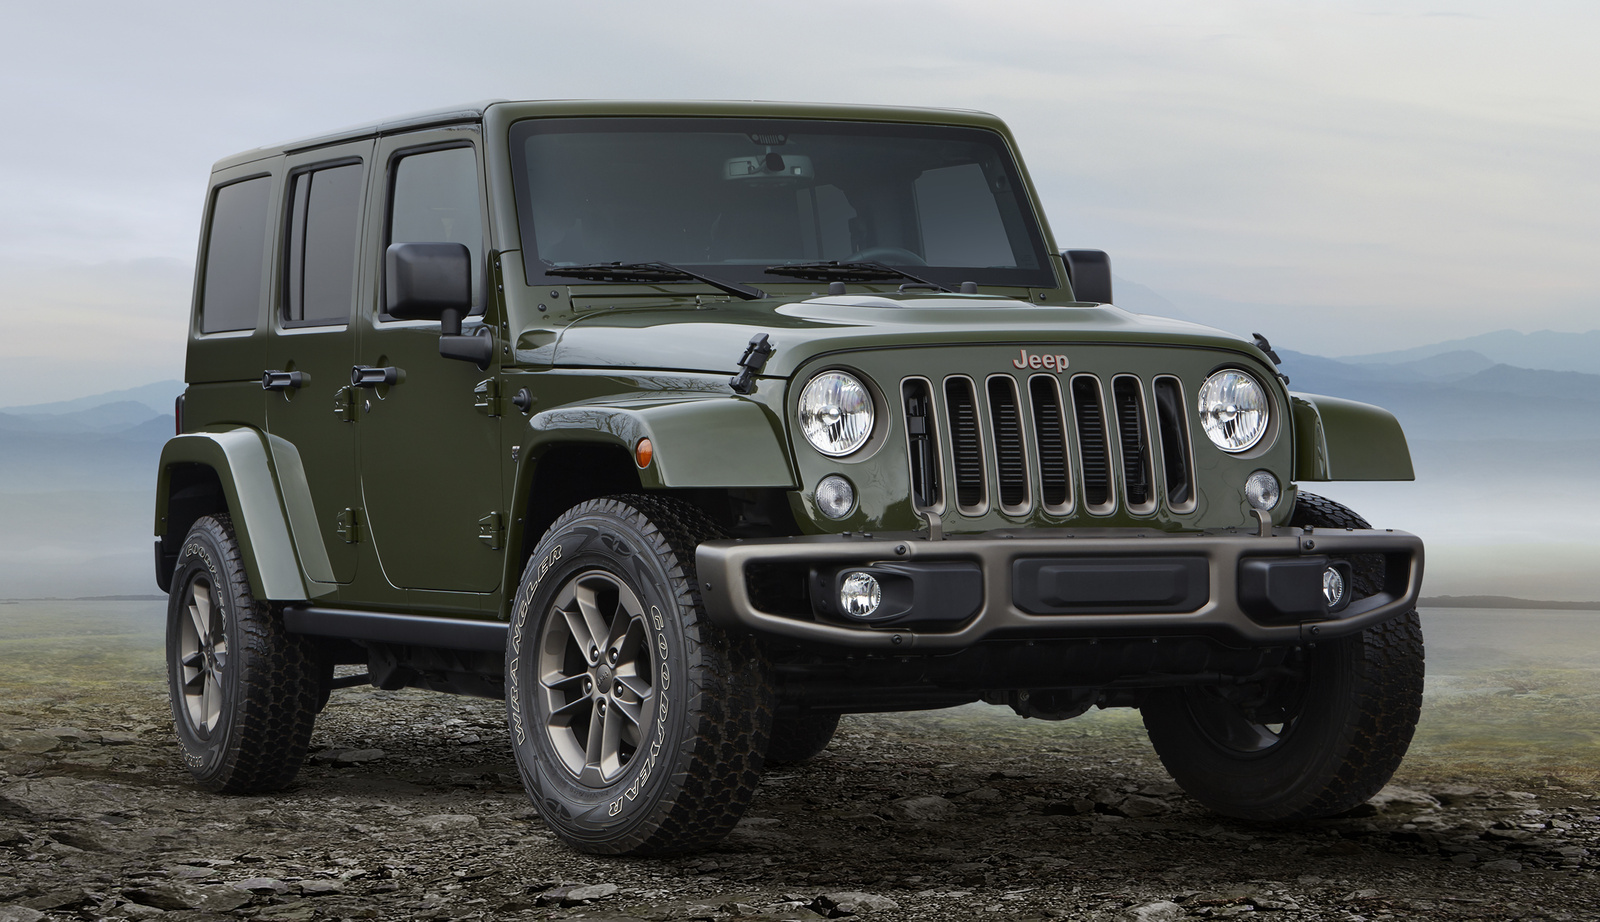 2016 Jeep Wrangler Unlimited Test Drive Review summaryImage